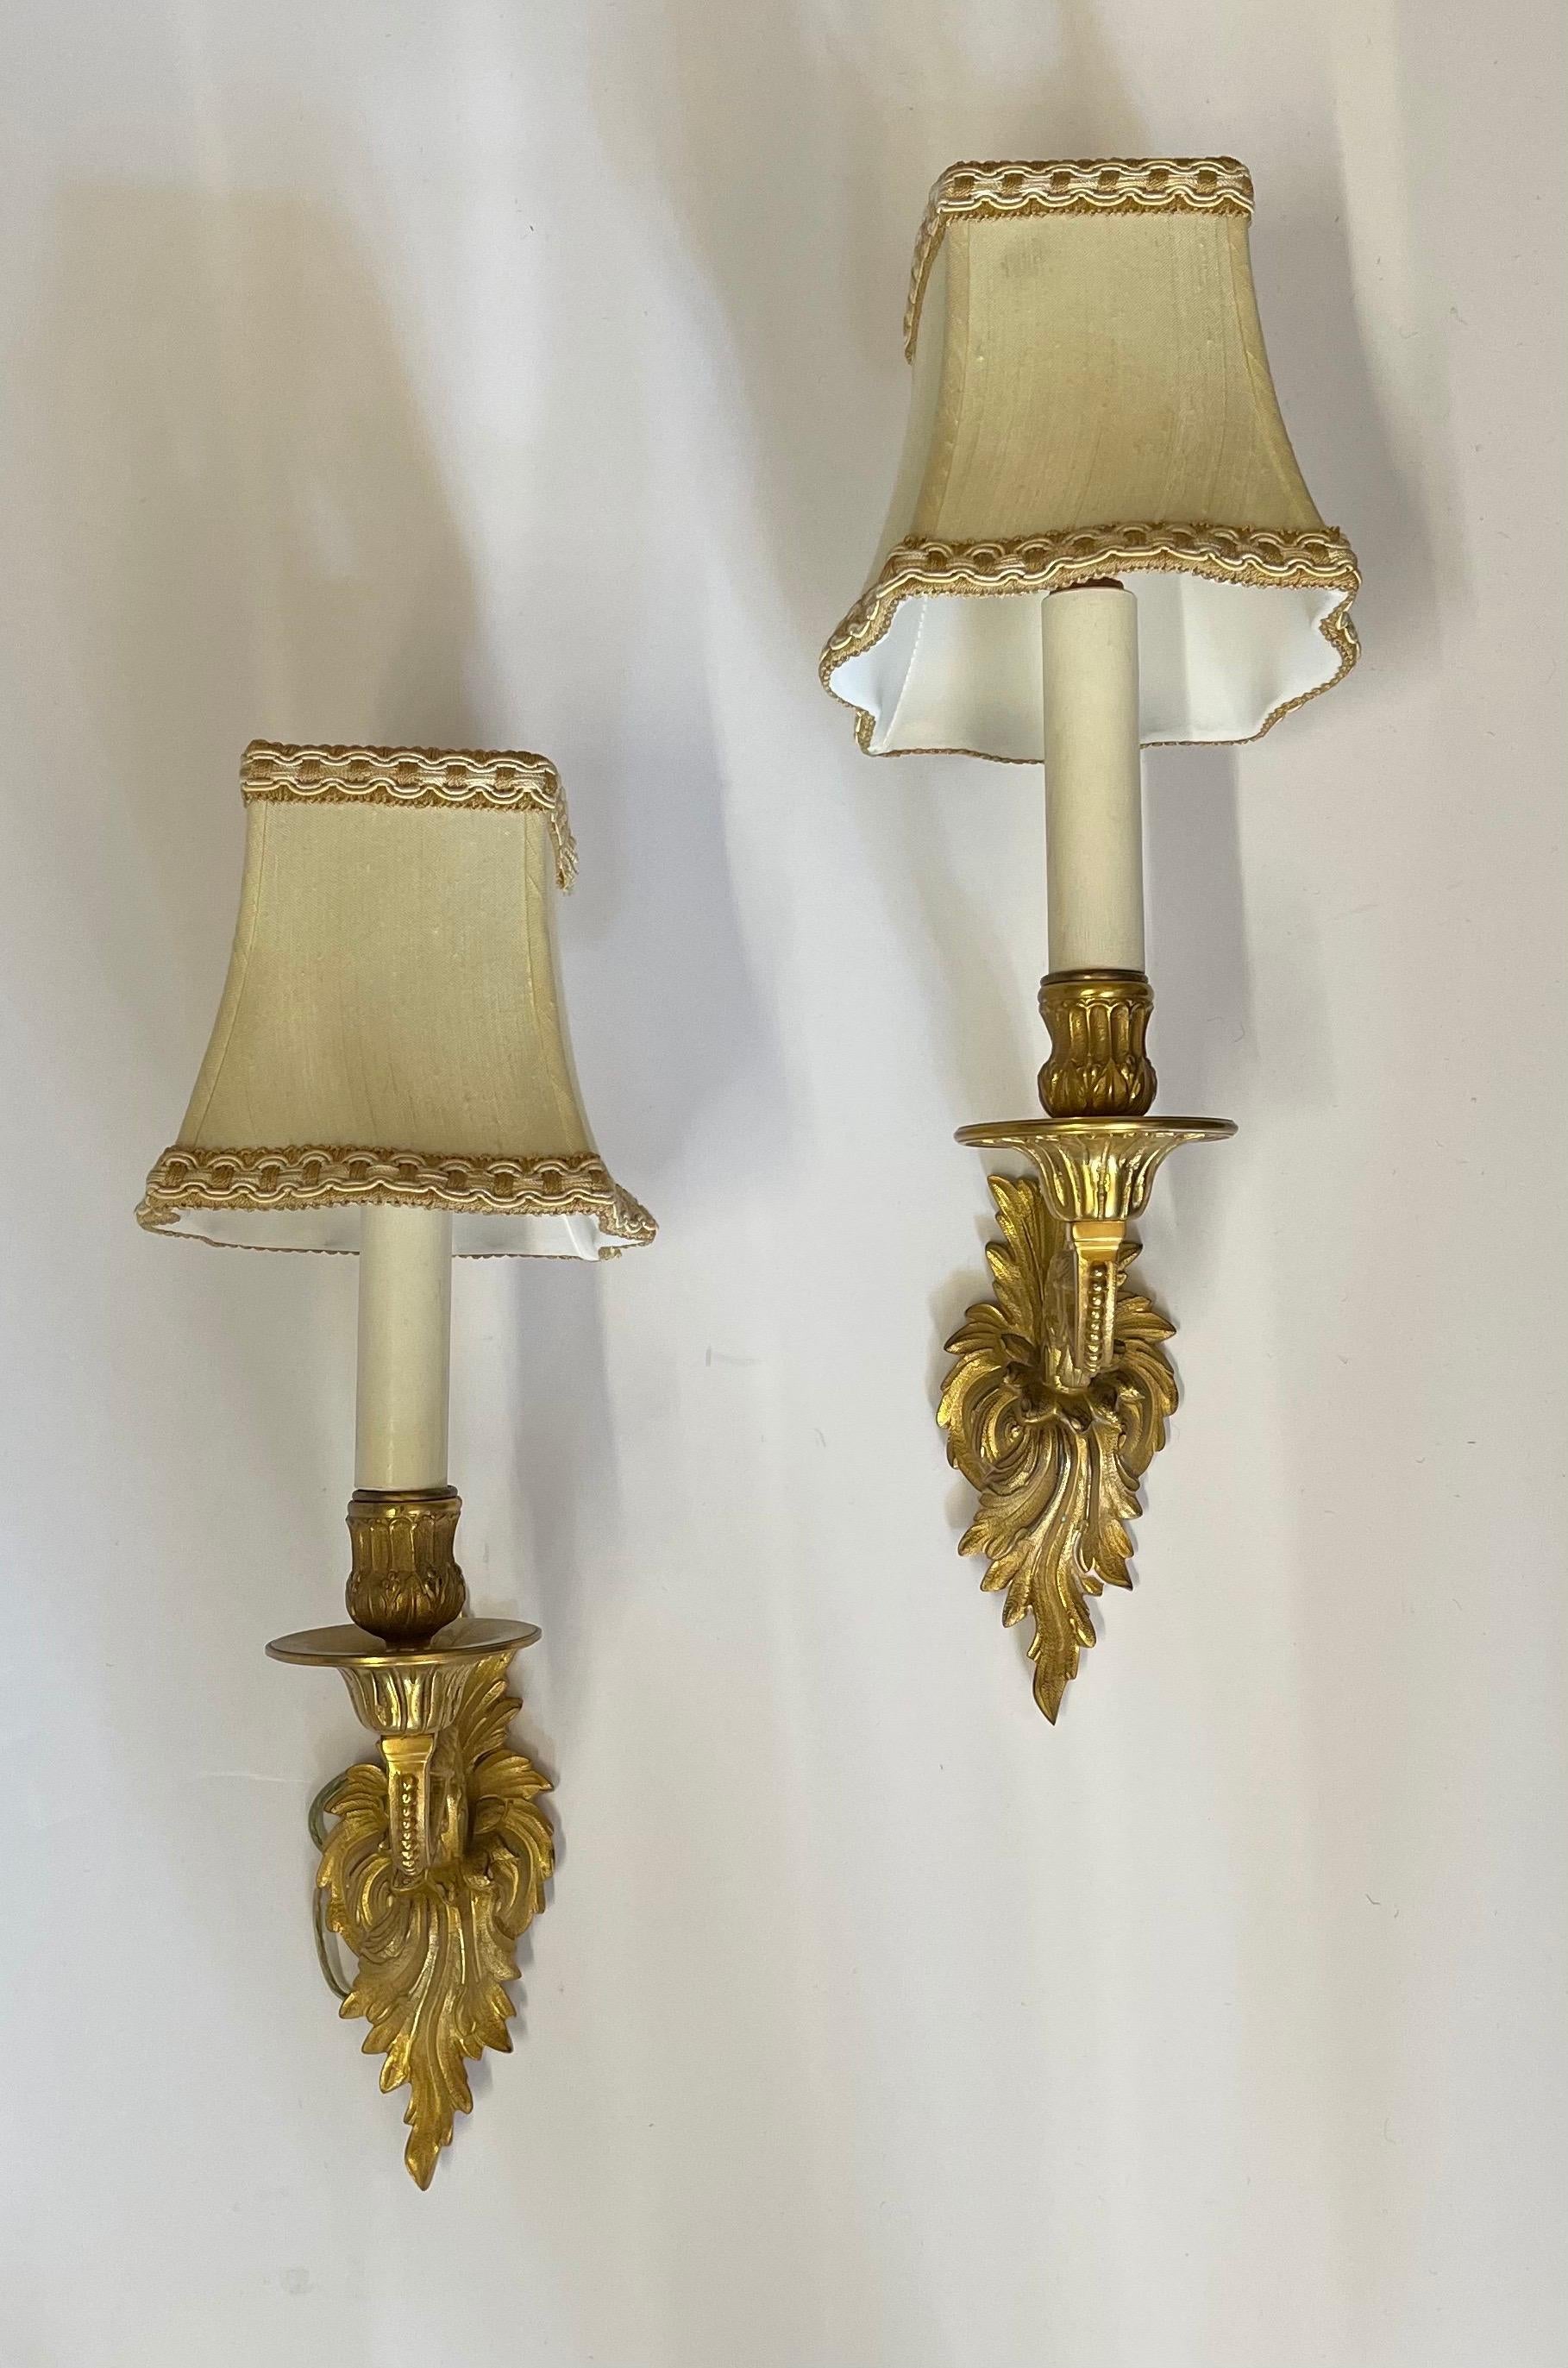 A wonderful pair of French doré bronze Rococo style single candelabrum arm sconces.
Rewired and ready to install.